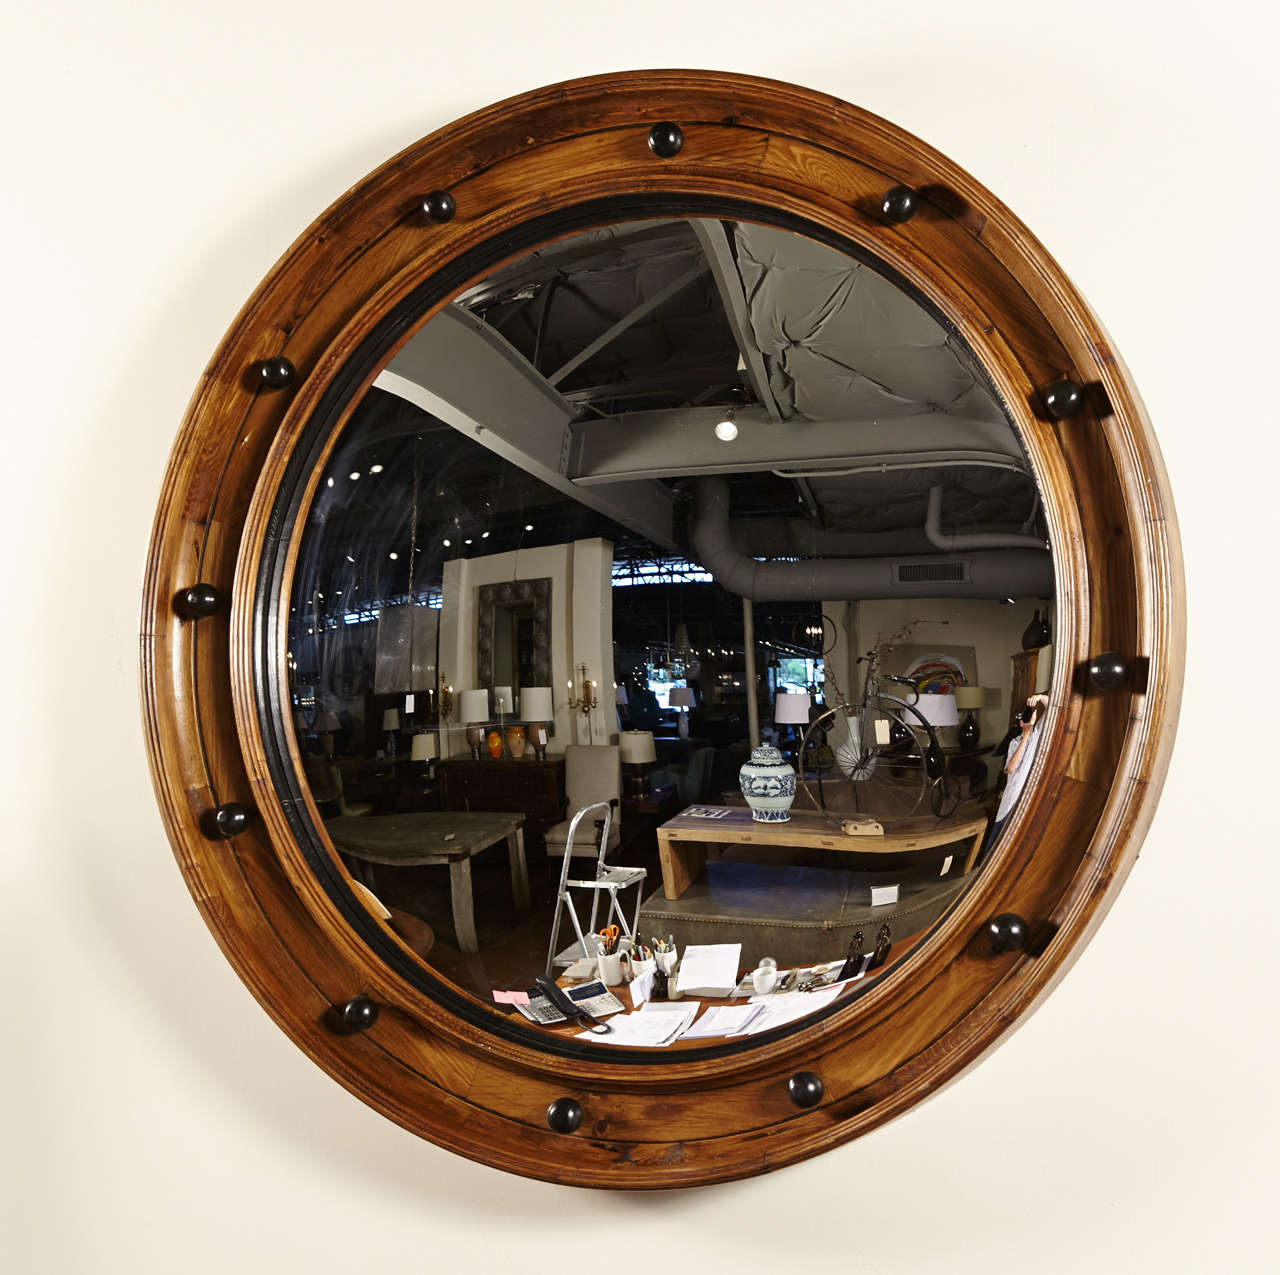 Elegant coastal decor style of pine wood wall mirror 
Convex mirror in reclaimed english pine frame
Reclaimed with light blonde tones of pine wood coloration 
Rivet nautical look of black balls placed around the mirror 
Weight: 60lbs  Origin: